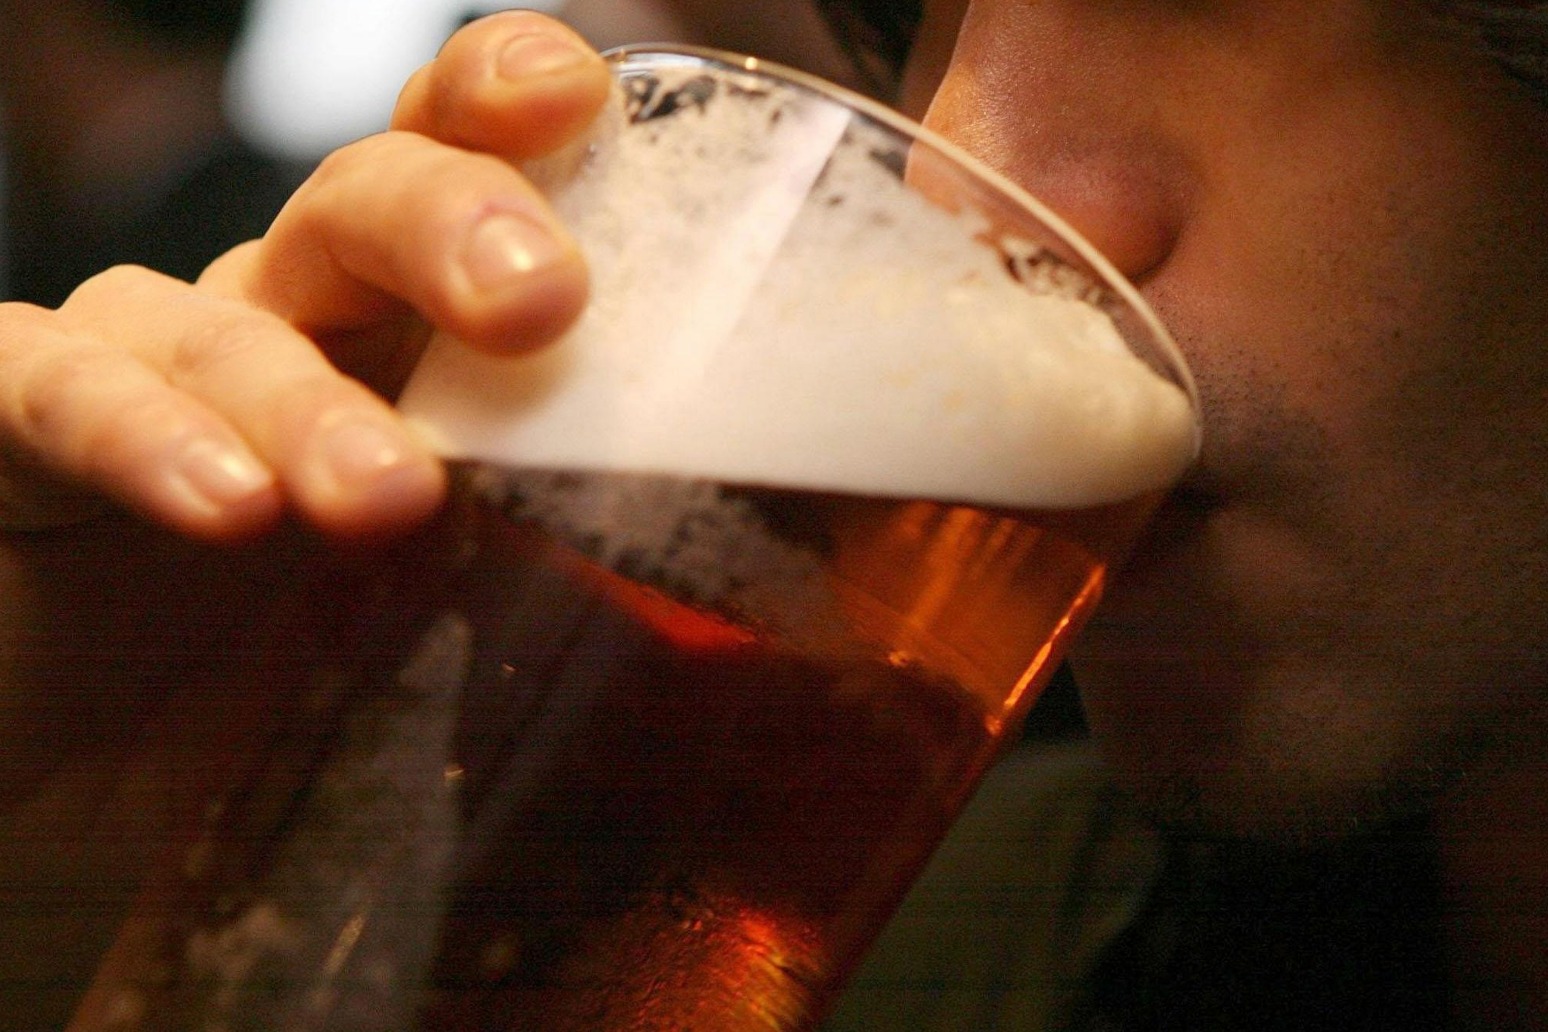 Pub chain Wetherspoon faces ‘challenge’ to get drinkers back into bars 